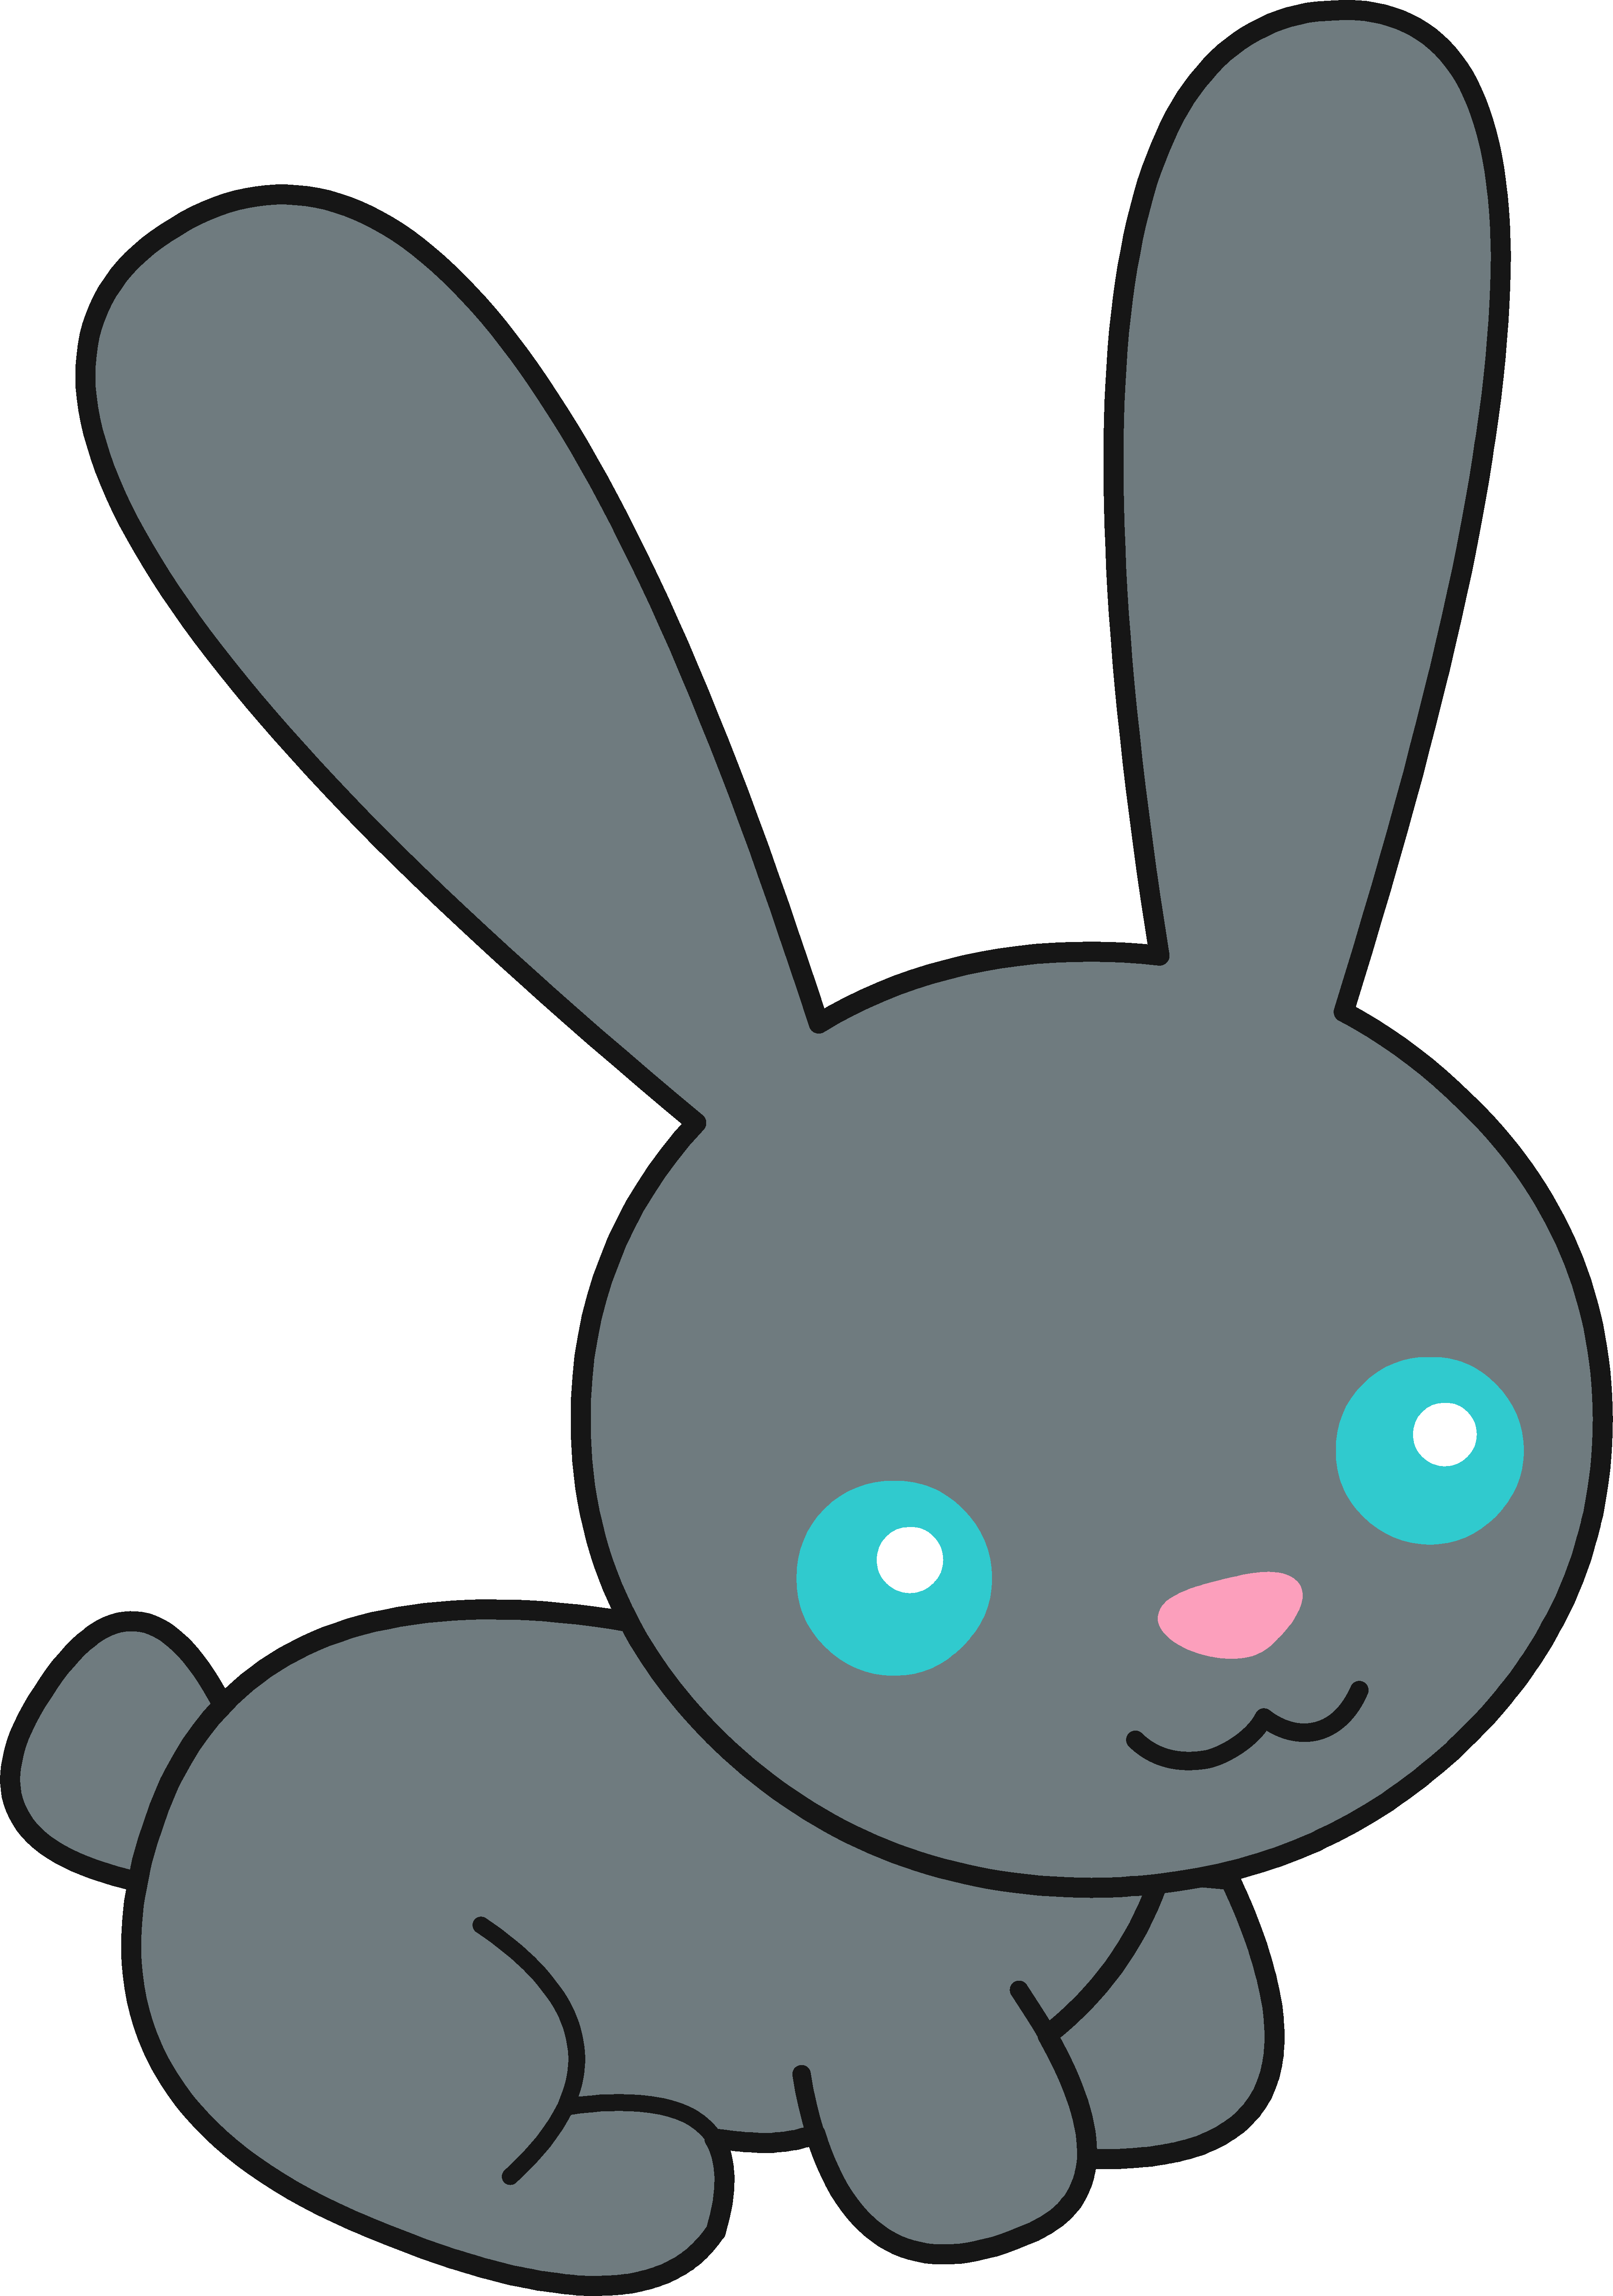 Cute Bunny Drawing - ClipArt Best